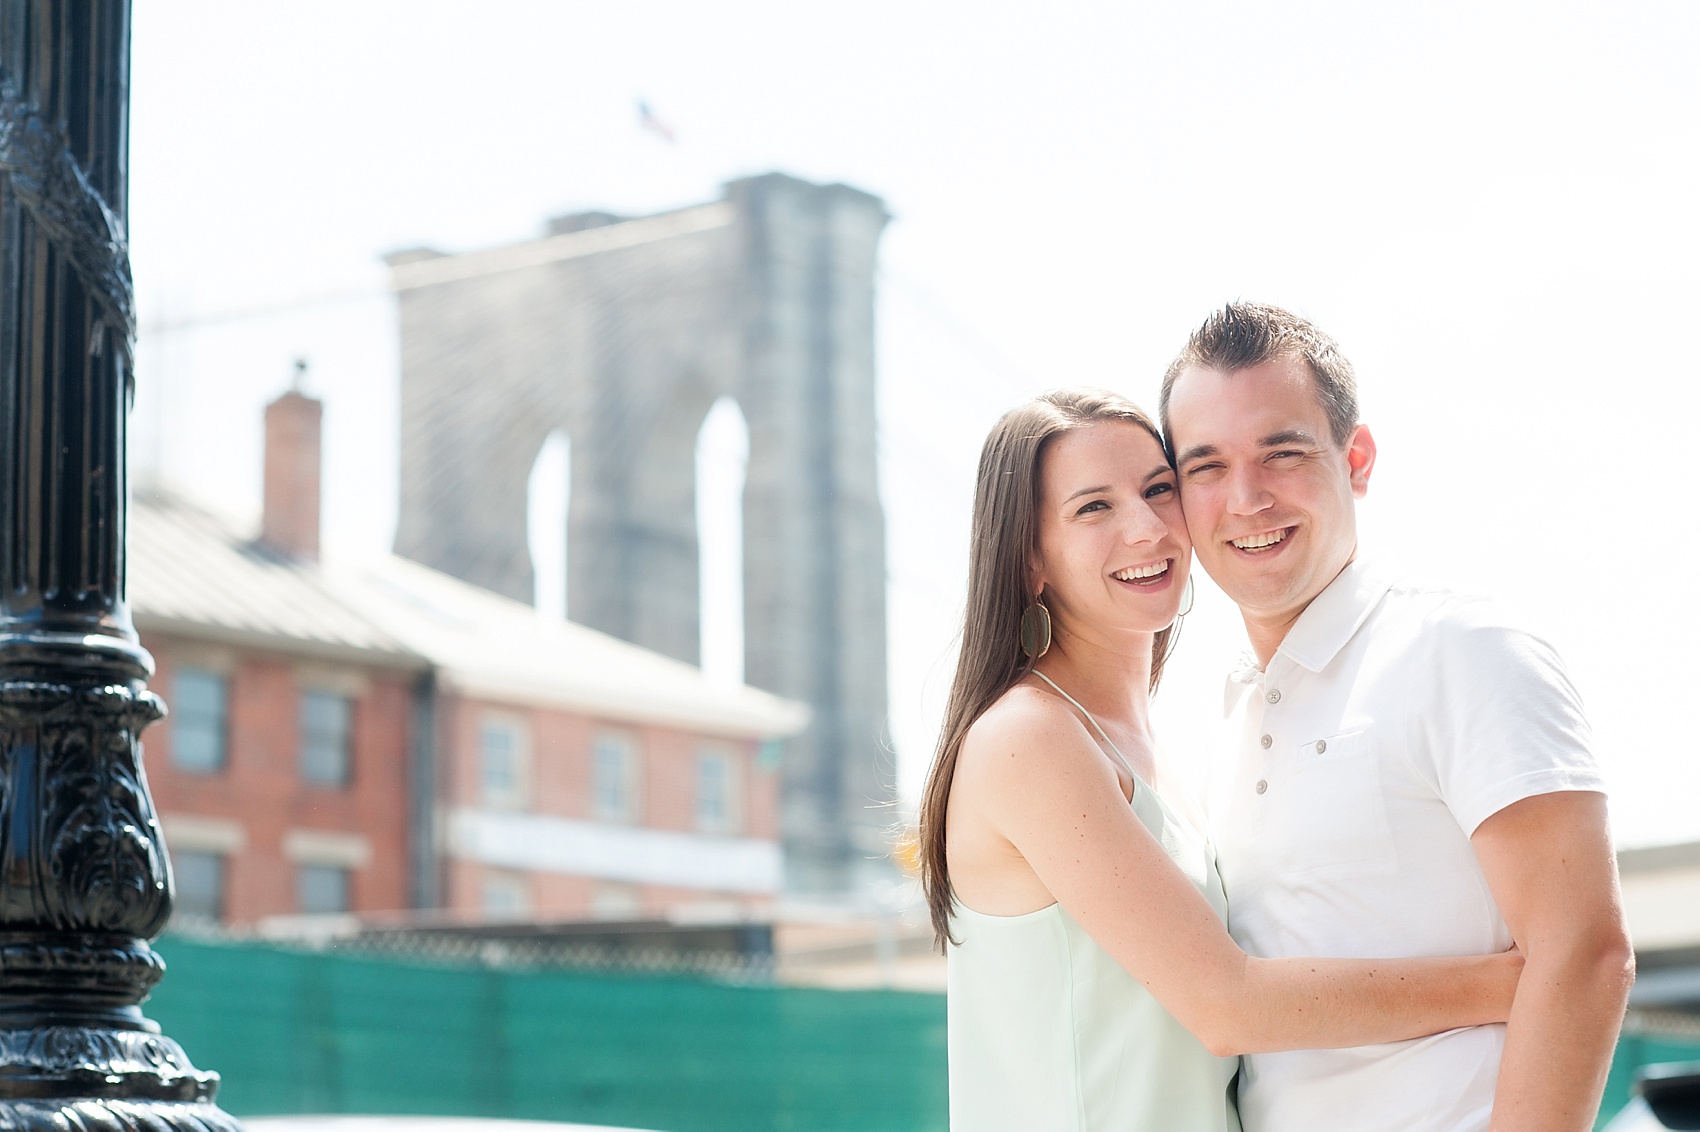 South Street Seaport engagement session in NYC. Photos by Mikkel Paige Photography. #nyc #southstreetseaport #brooklynbridge